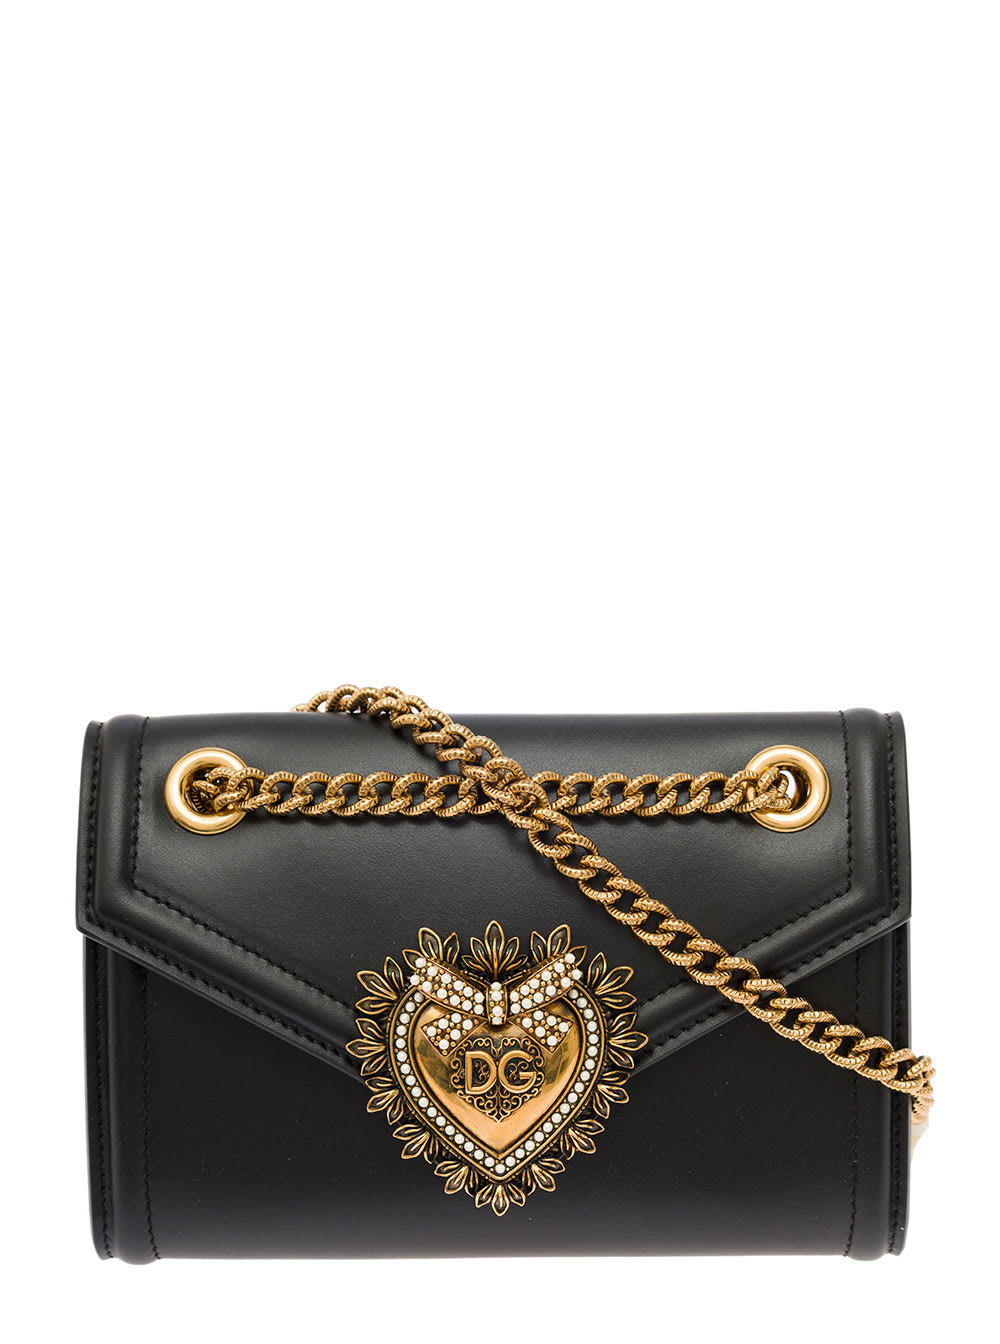 devotion Black Mini Bag With Chain Strap In Smooth Leather Woman Dolce & Gabbana